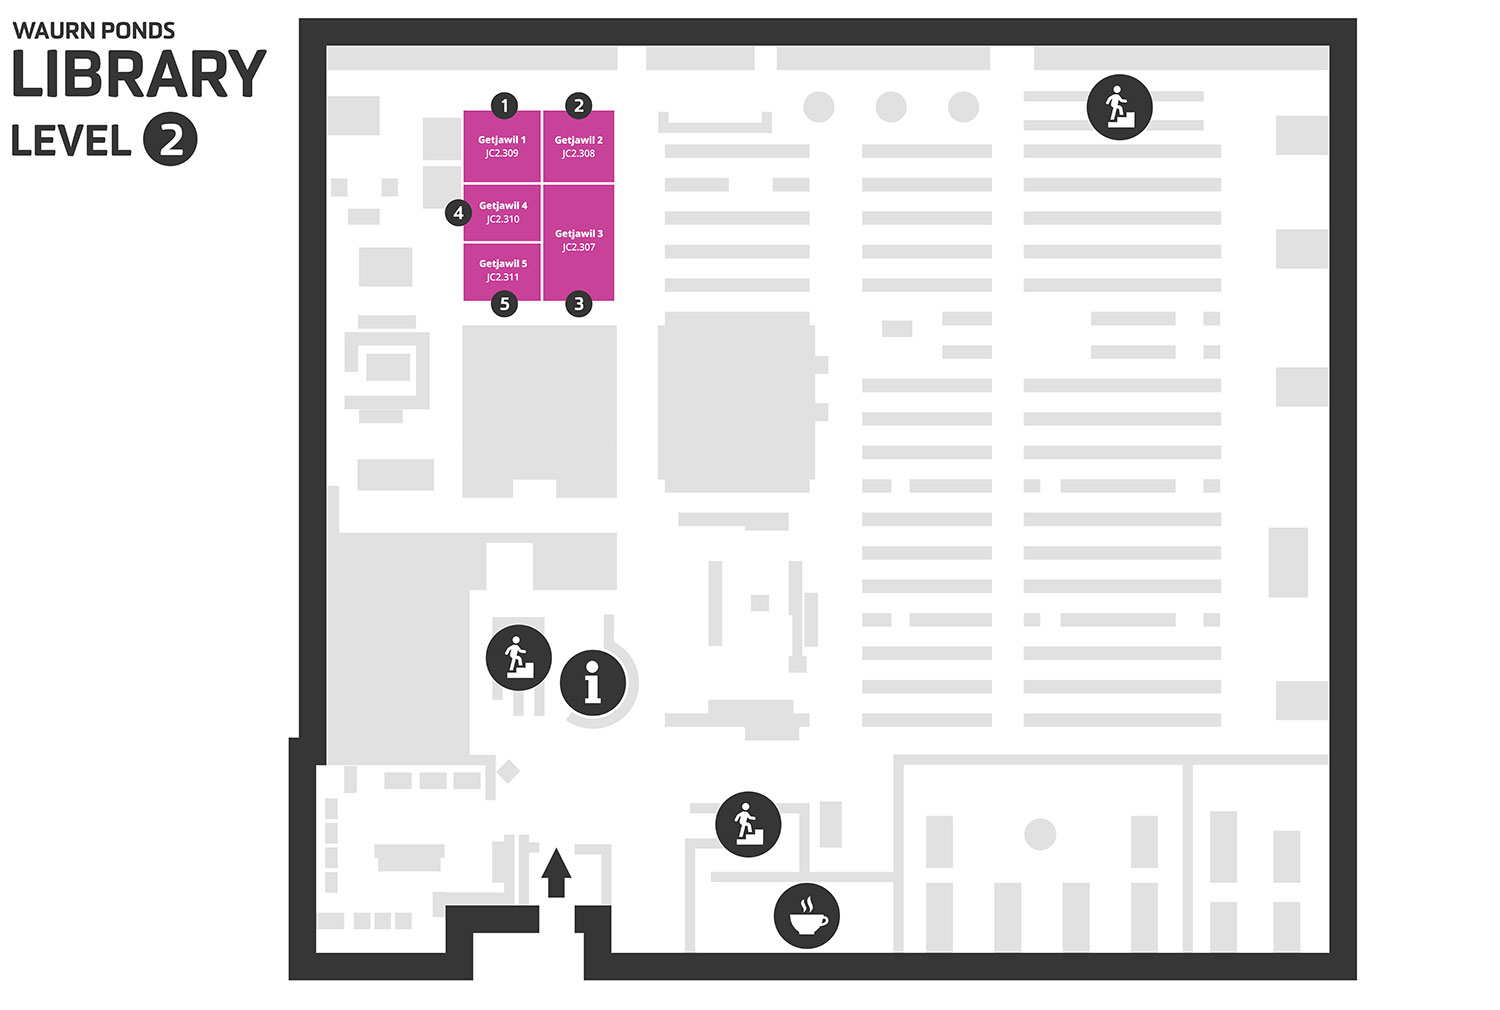 floor plan image of Waurn Ponds campus library level 2